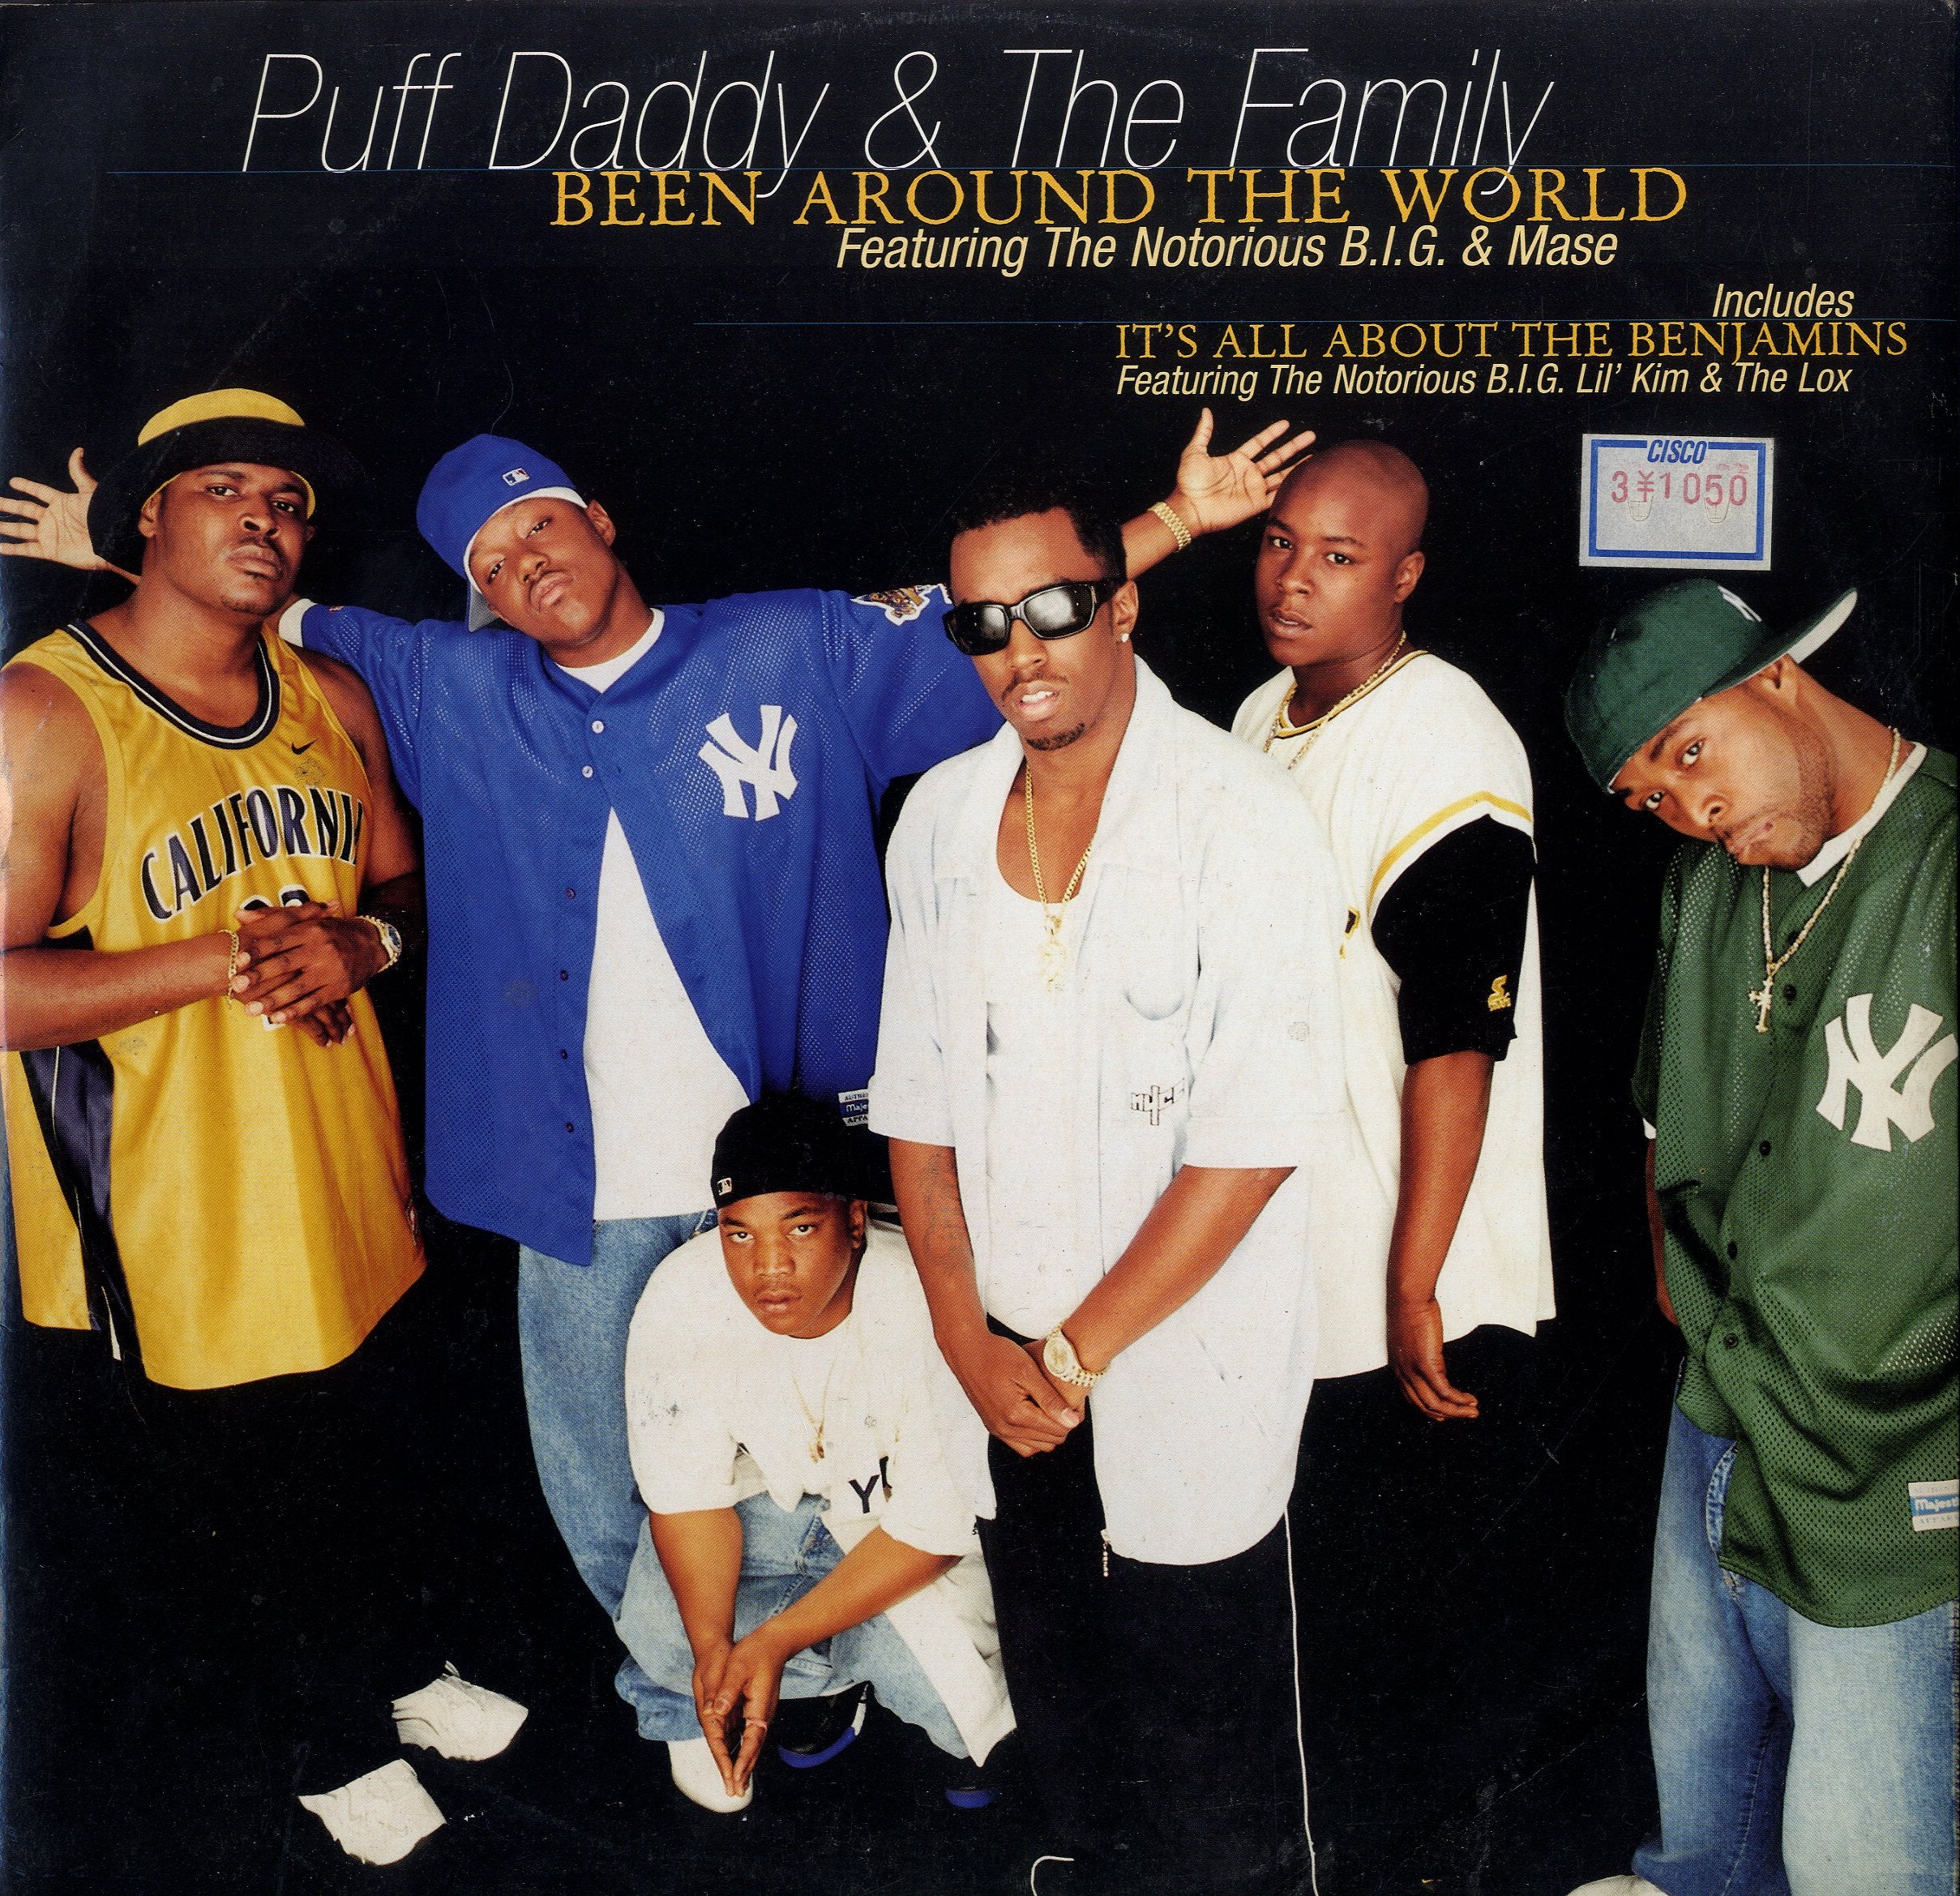 PUFF DADDY & THE FAMILY FEAT. NOTORIOUS B.I.G. & MASE [Been Around The World / It's All About The Benjamins]